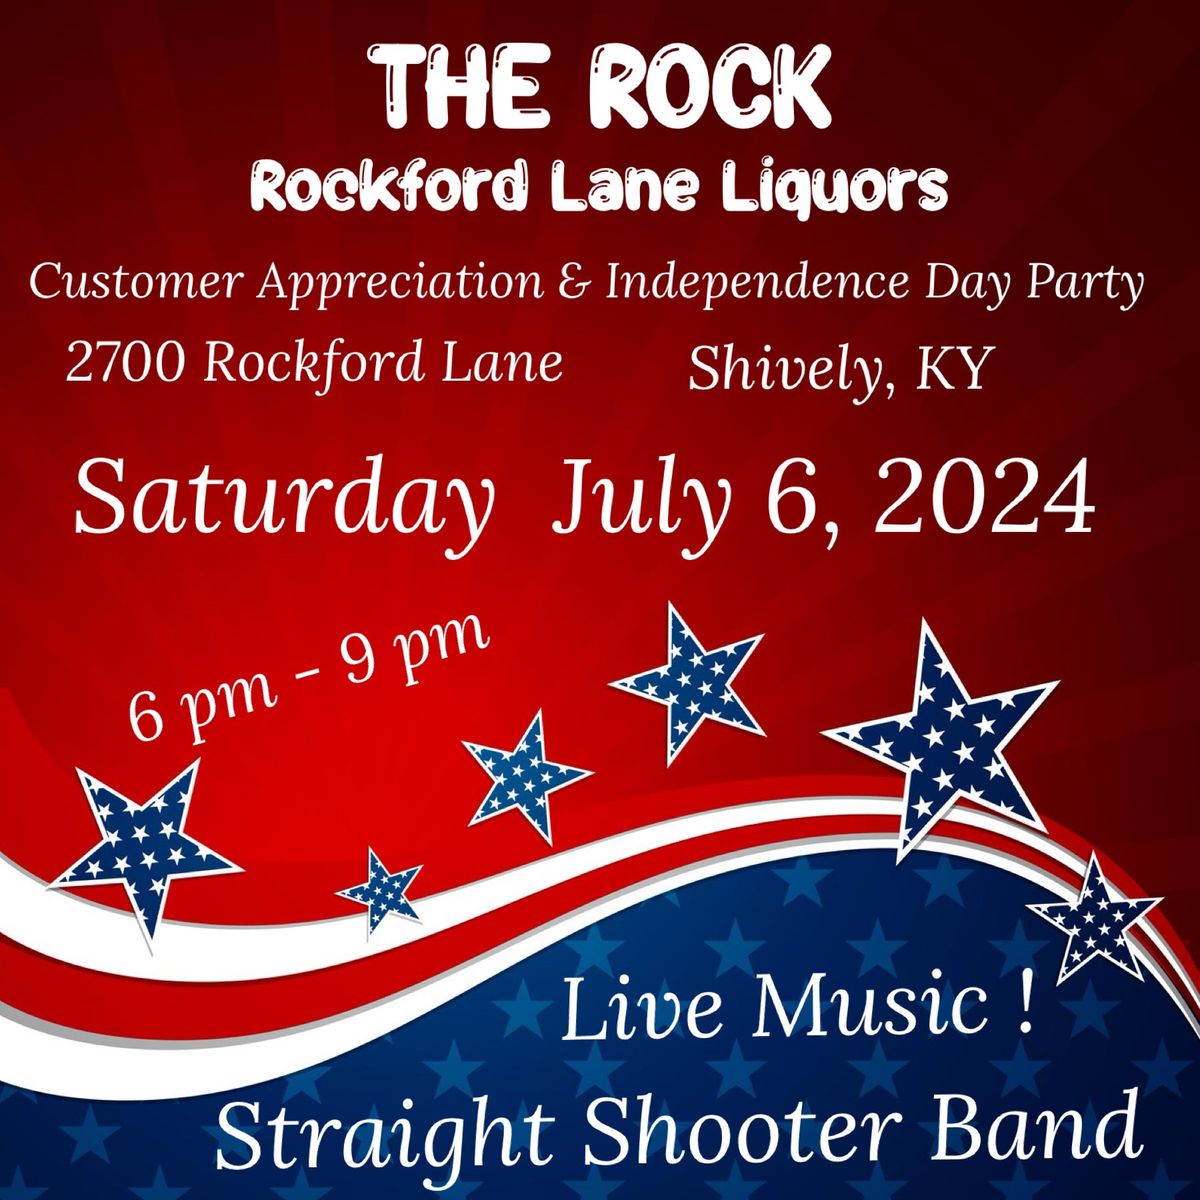 Straight Shooter Band At The ROCK \ud83d\ude0e Rockford Lane Liquors